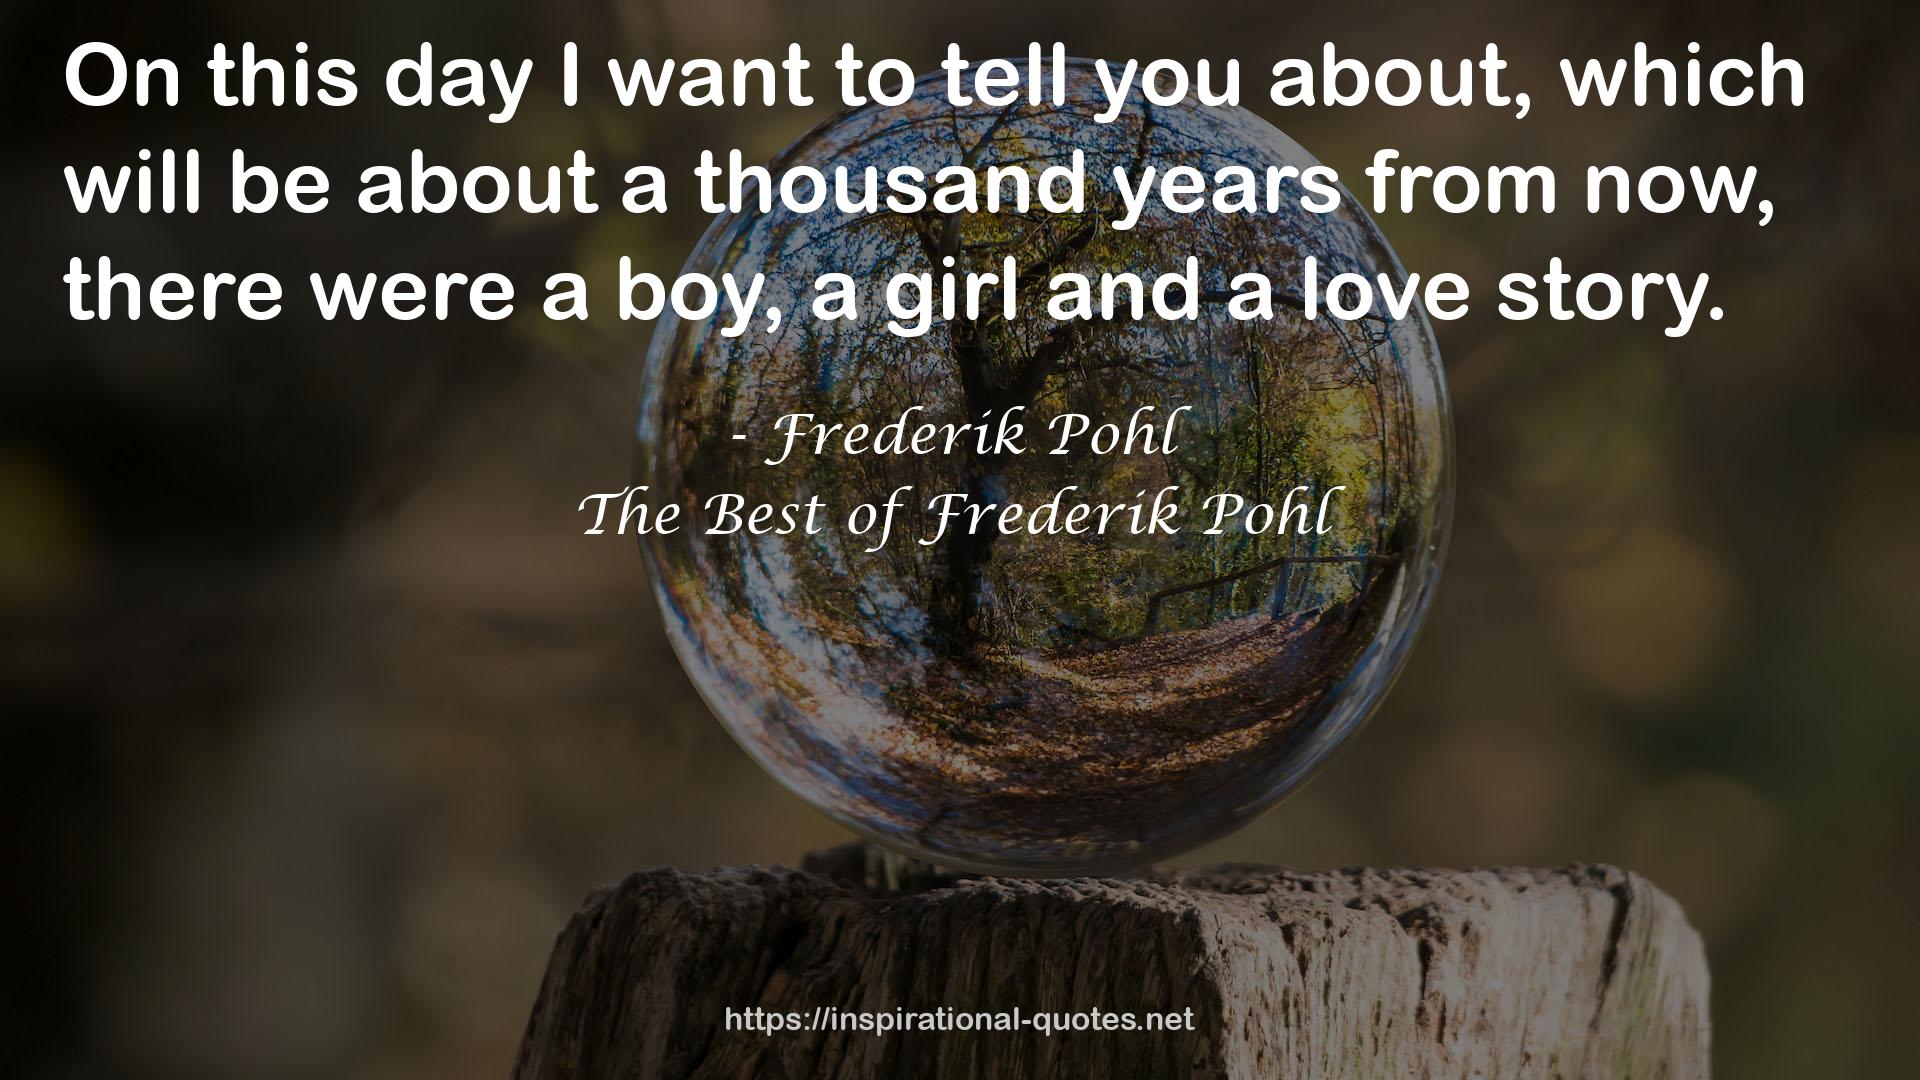 The Best of Frederik Pohl QUOTES